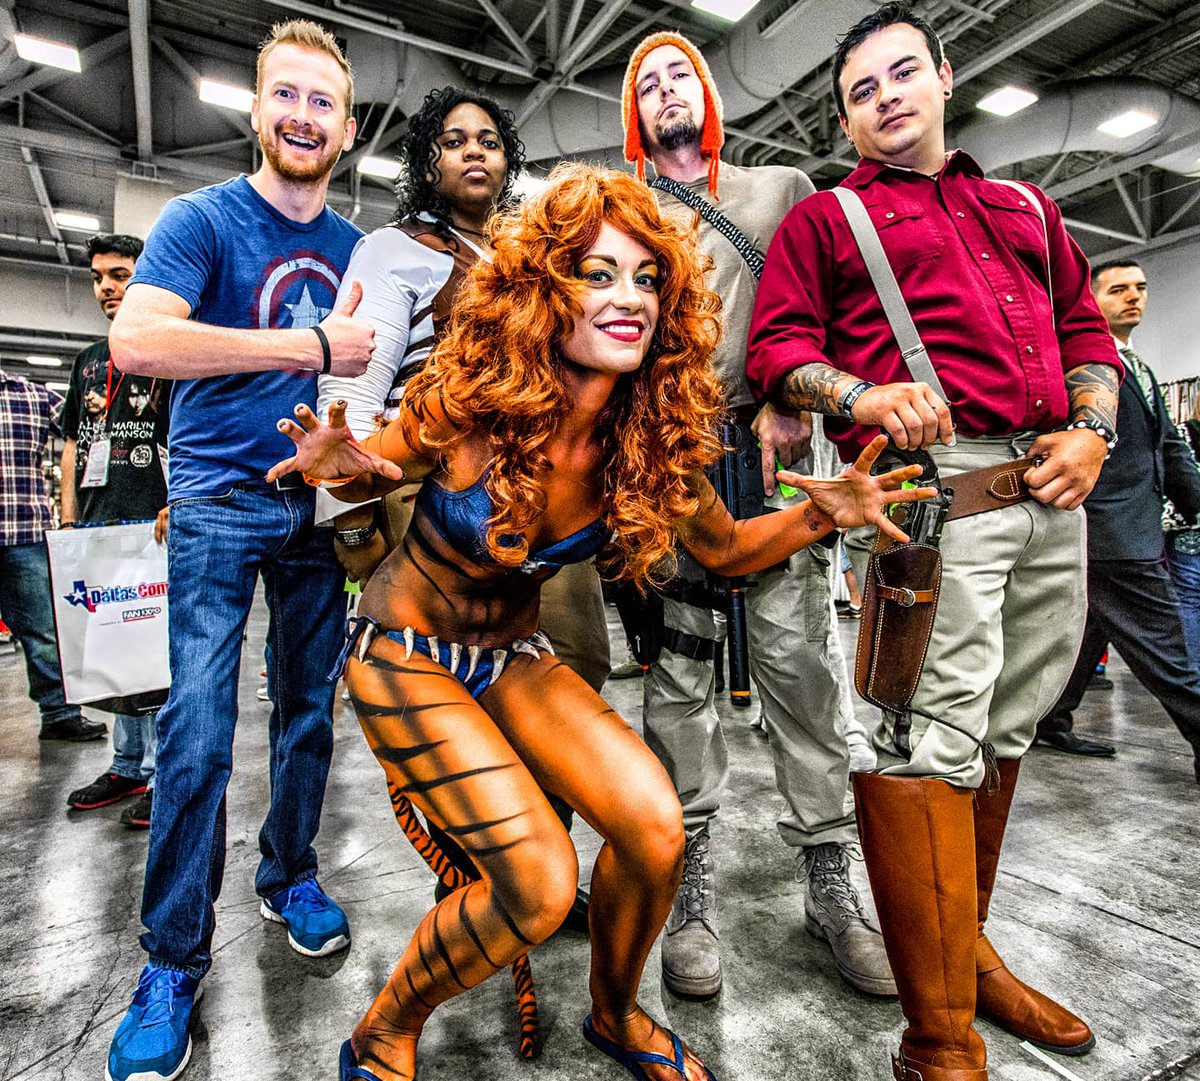 Sad and grateful that @fanexpodallas originally scheduled for this weekend was delayed,  for good obvious reasons. 
So in spirit for todays #flashbackfriday I'll bring back this shot from @dallasobserver at @dallascomiccon Con 2014. 📸: @edsteele 
 #dallas #fbf #quarantinelife